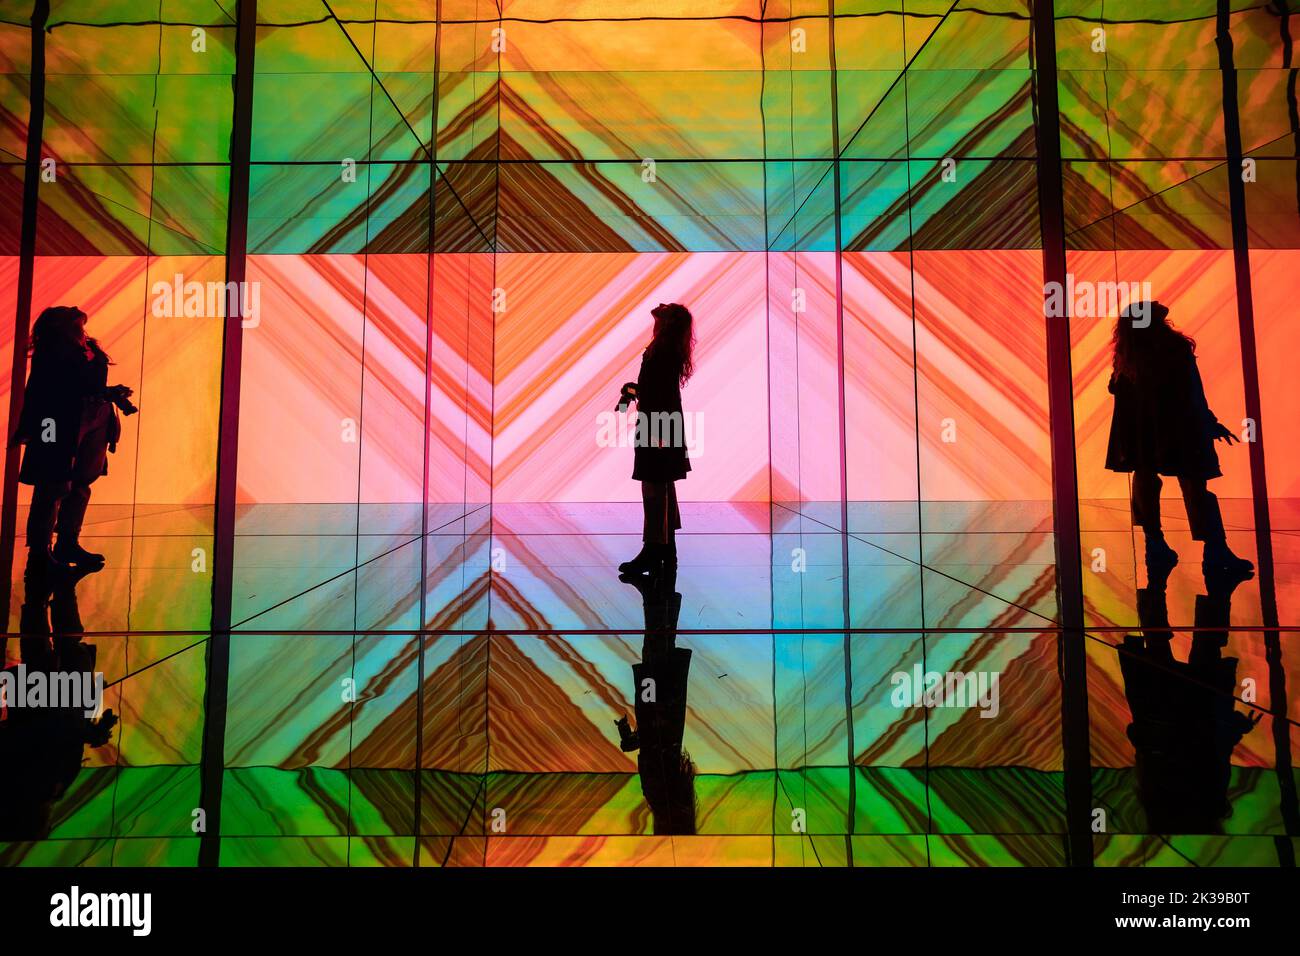 London, UK. 25th September, 2022. INTO SIGHT. The large-scale installation by Sony Design sees audience behaviour influence the visuals and soundscape. It combines Sony's Crystal LED display systems with generative sound, see-through glass walls and mirrors. The work is on show as part of the 20th London Design Festival 2022. Credit: Guy Corbishley/Alamy Live News Stock Photo